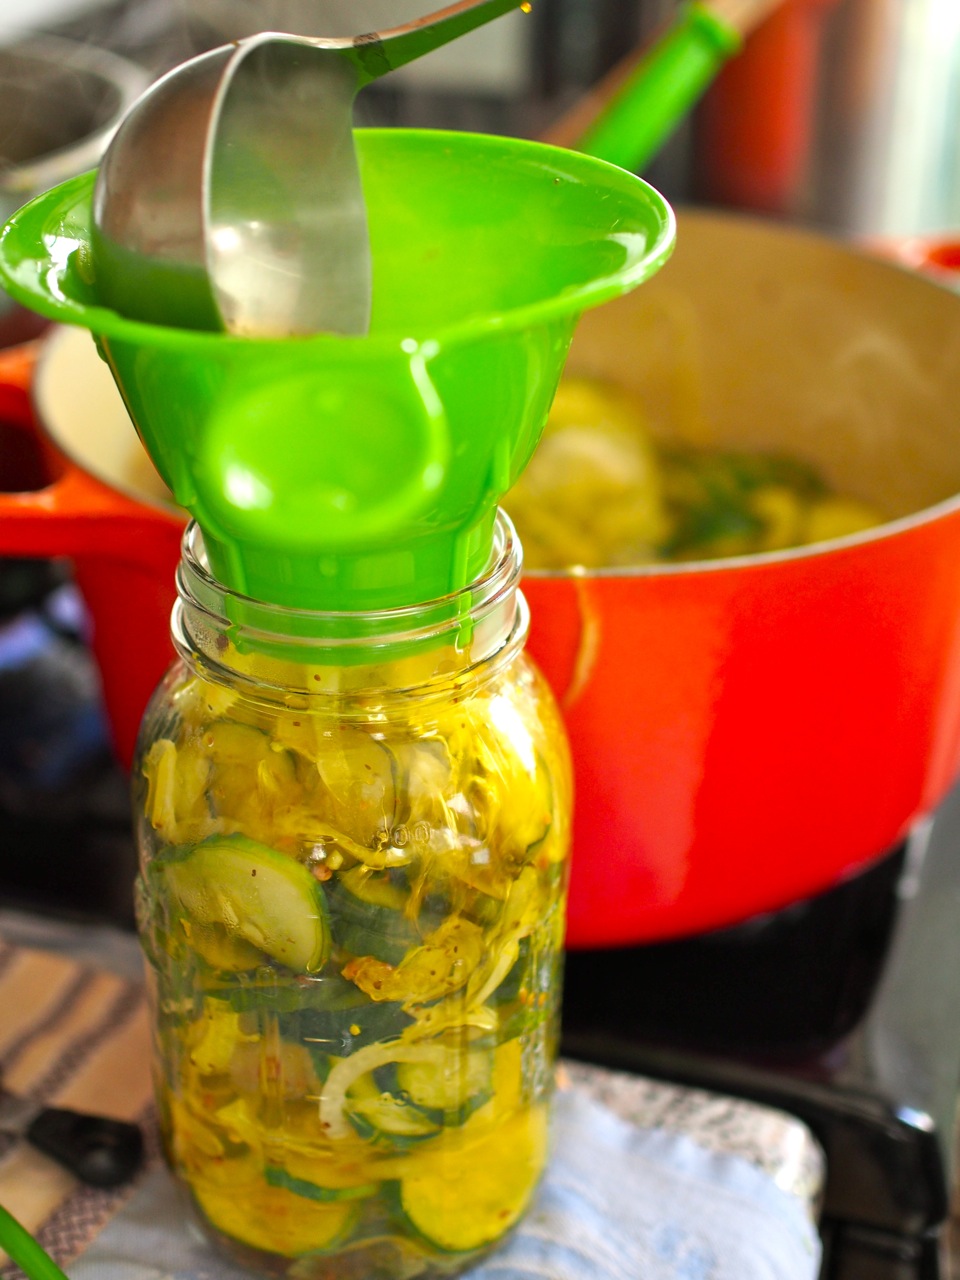 Filling jars with bread-and-butter pickles